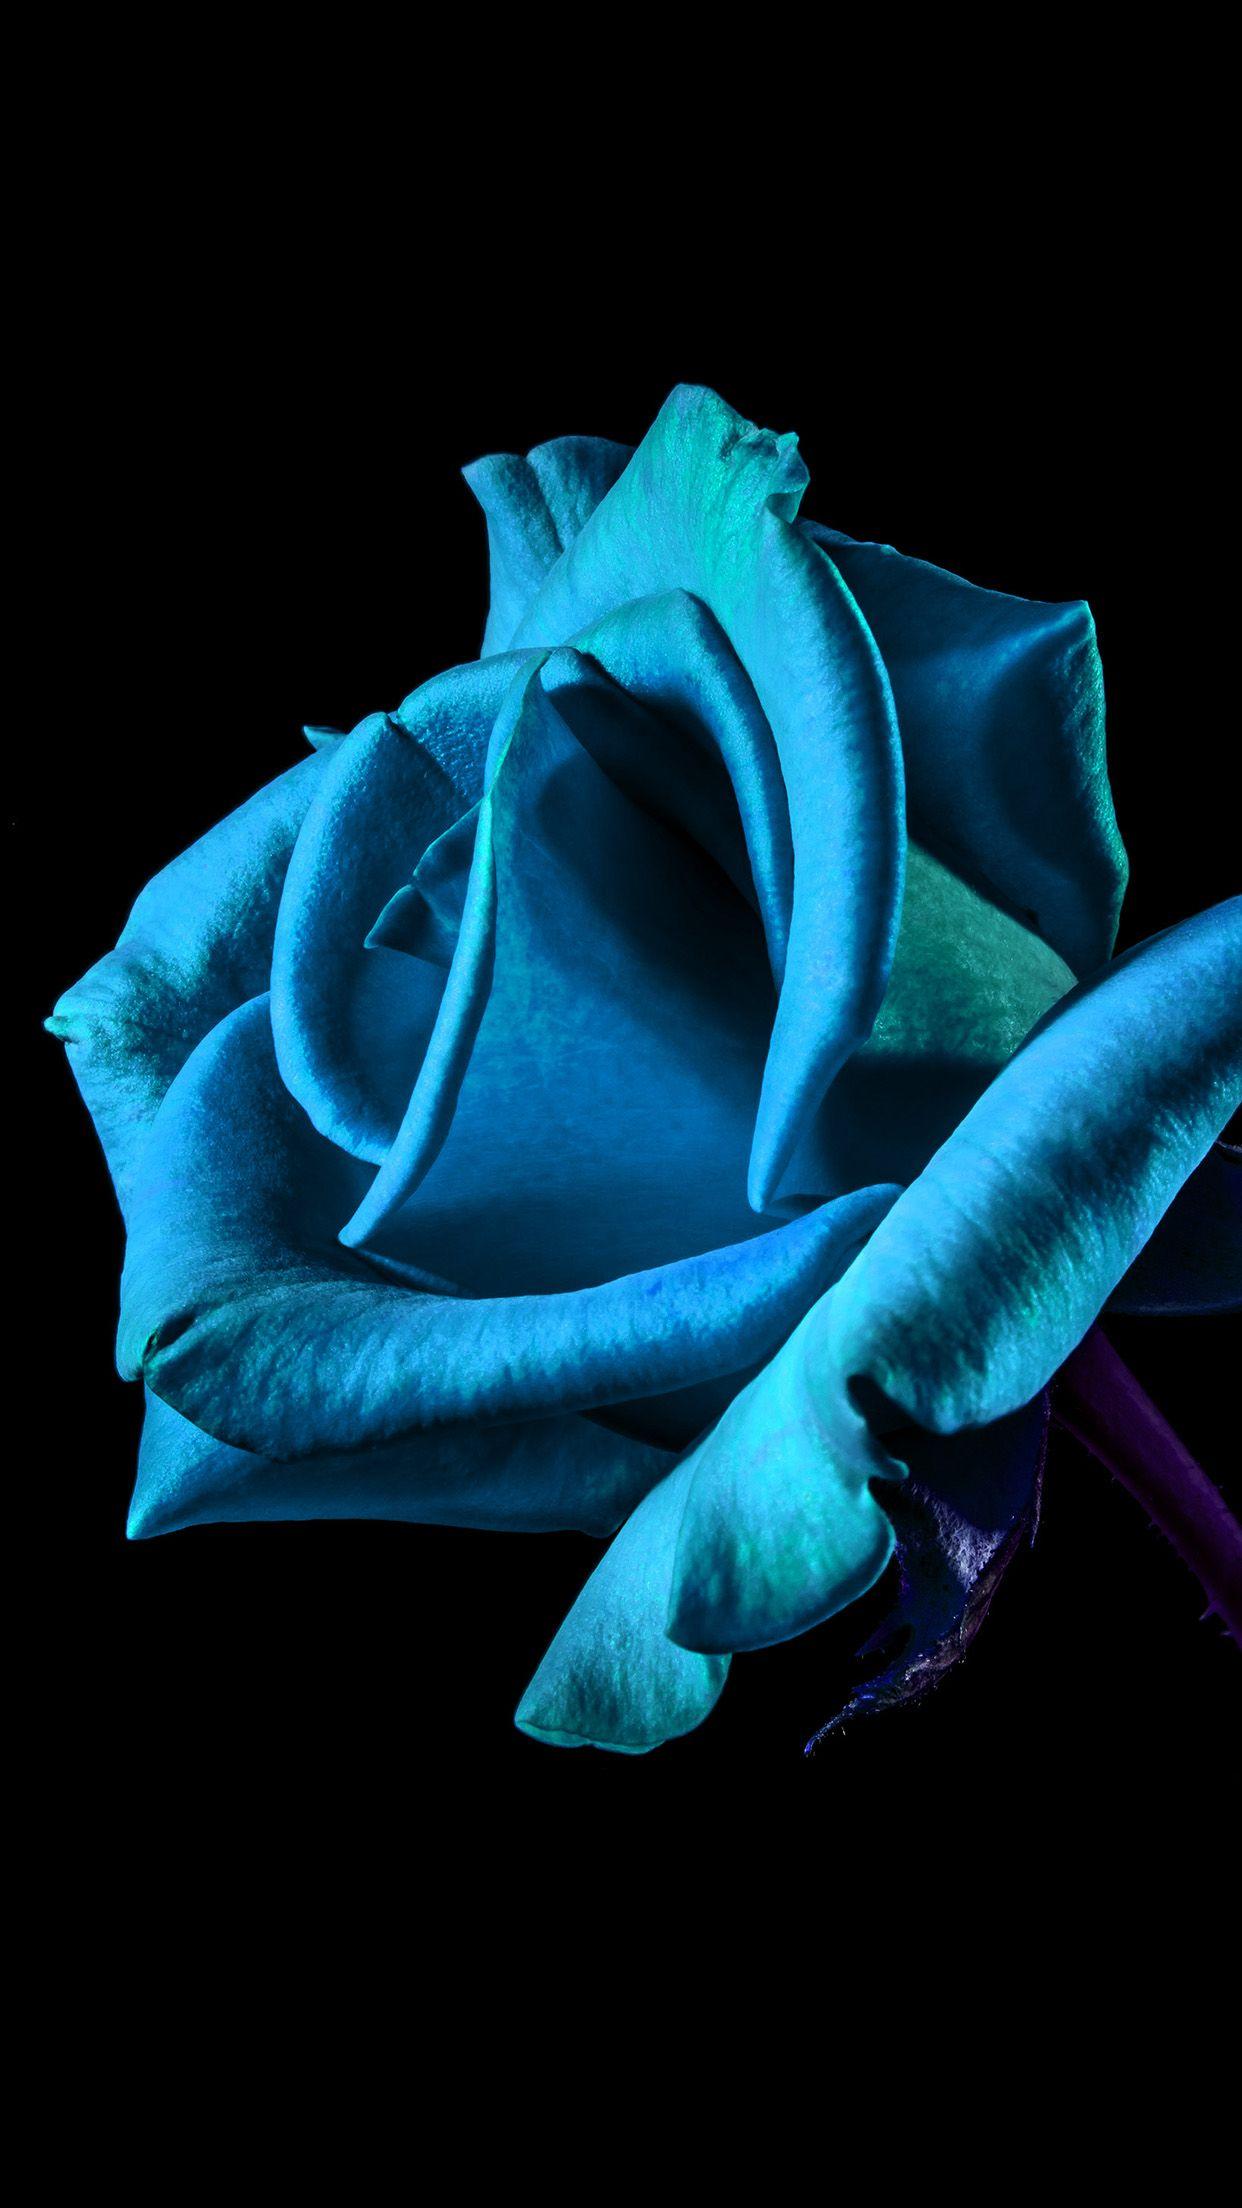 Black and Blue Flower Wallpapers - Top Free Black and Blue Flower